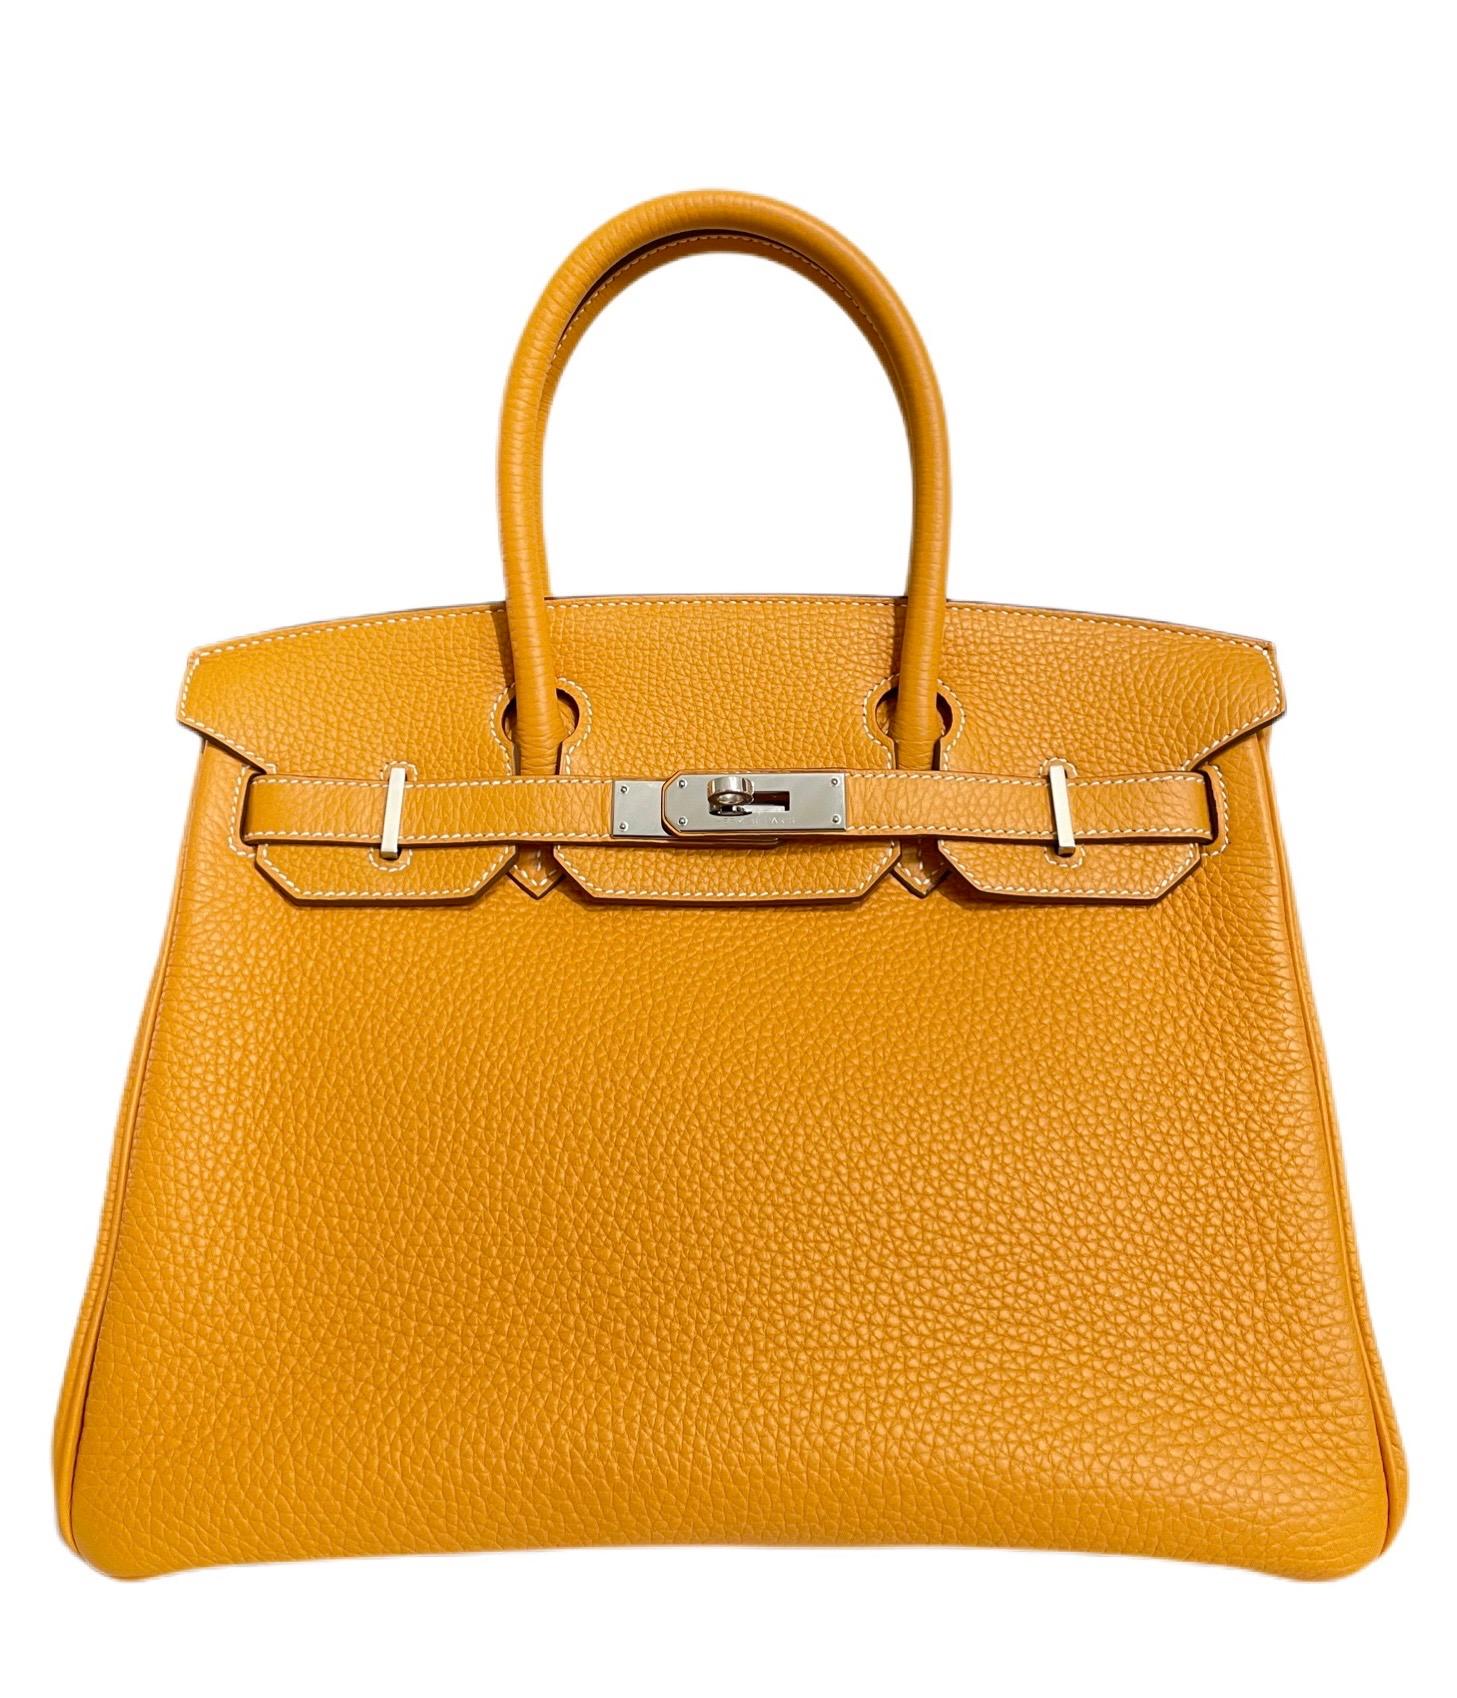 Stunning Rare Hermes Birkin 30 Moutarde Mustard Yellow Palladium Hardware. Excellent Condition, light hairlines on hardware, excellent corners and structure. 

Shop with Confidence from Lux Addicts. Authenticity Guaranteed! 